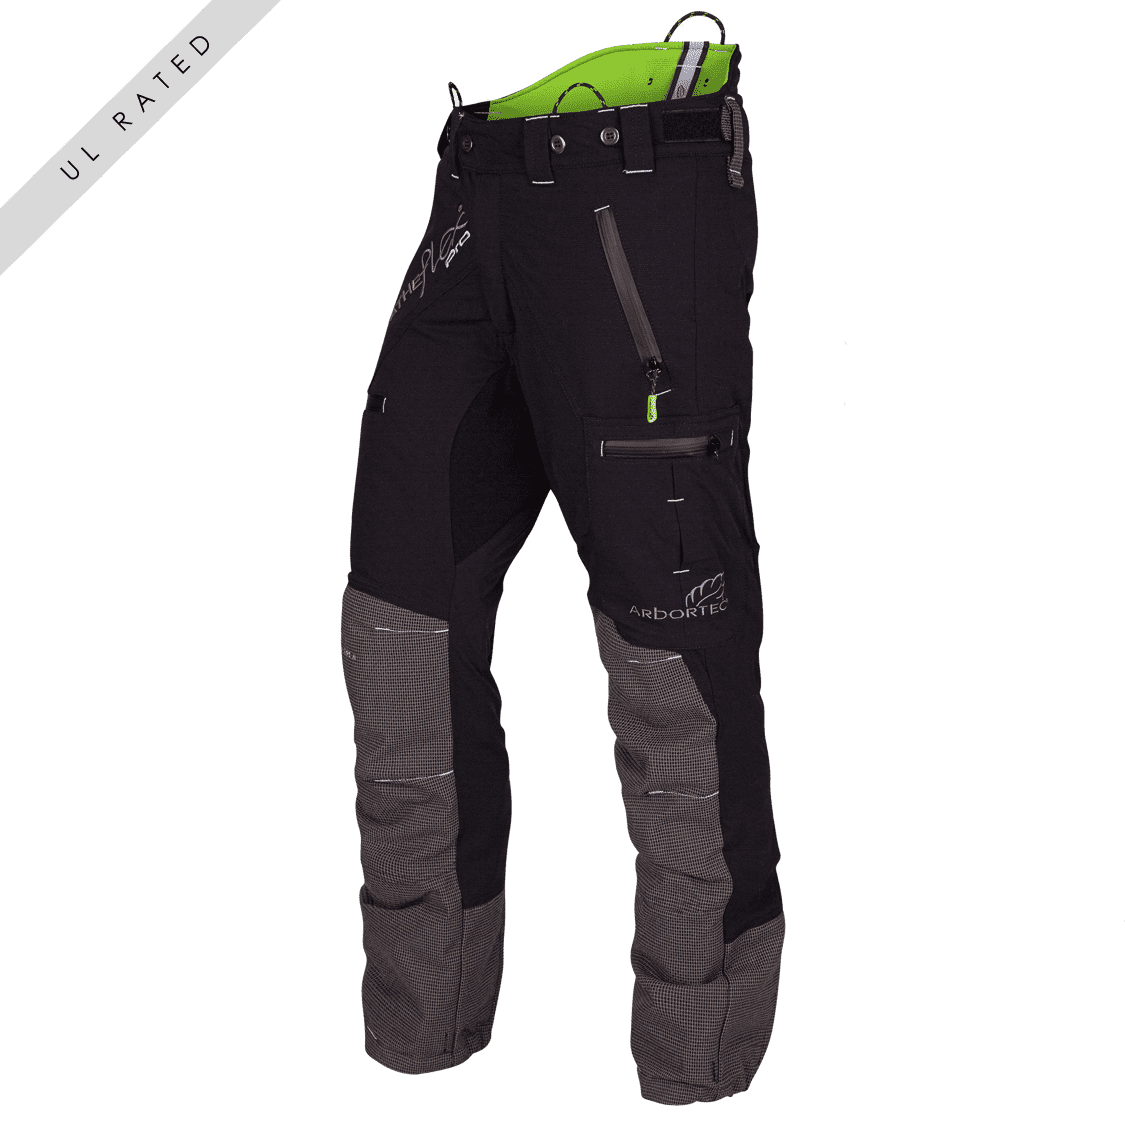 AT4060(US) Breatheflex Pro Chainsaw Trousers UL Rated - Black